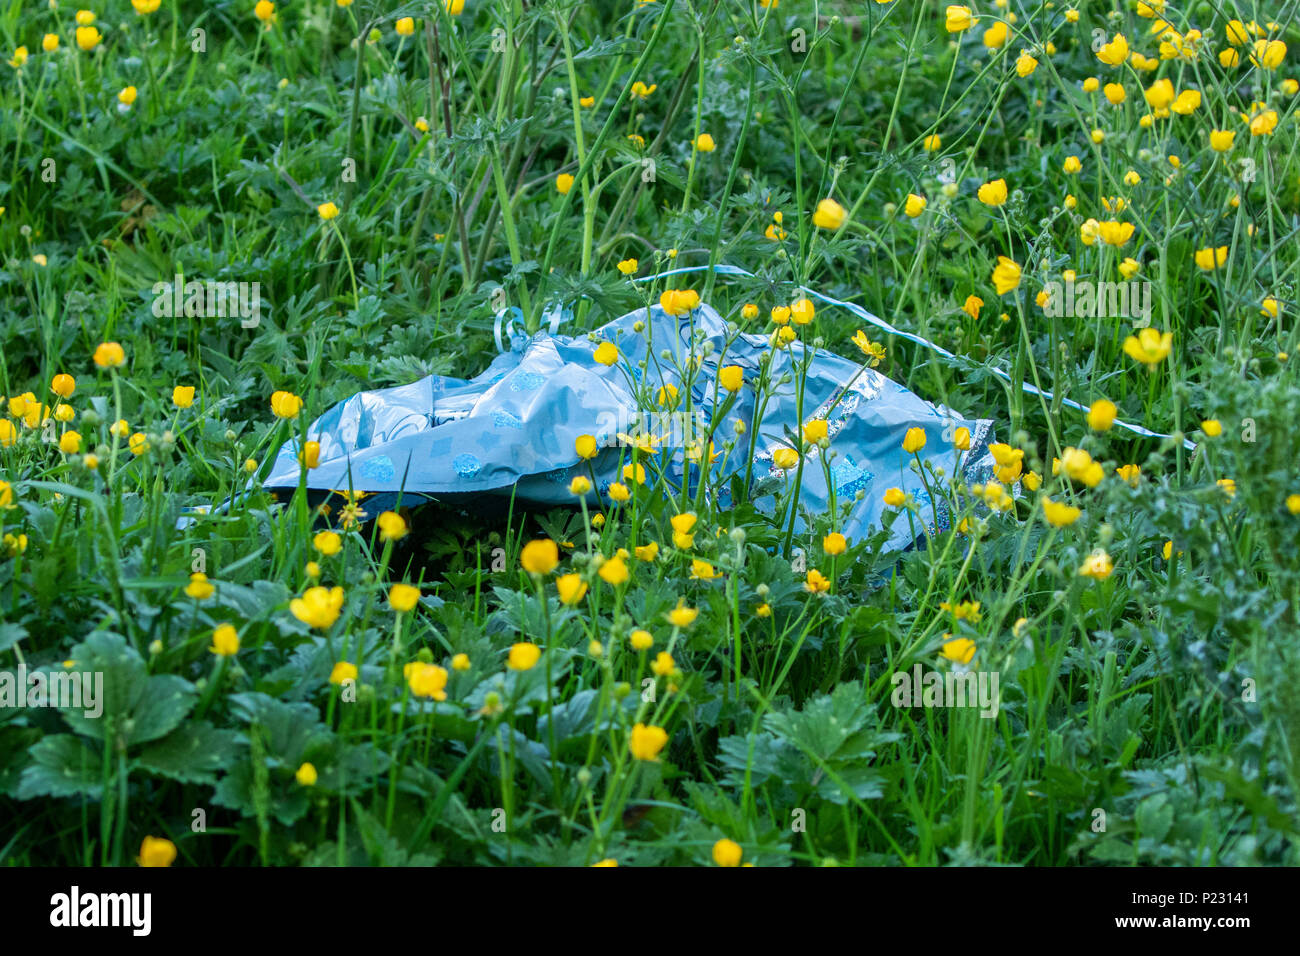 Balloon Litter. Balloons have landed in a field causing balloon release litter damaging the environment and harm to wildlife. Stock Photo